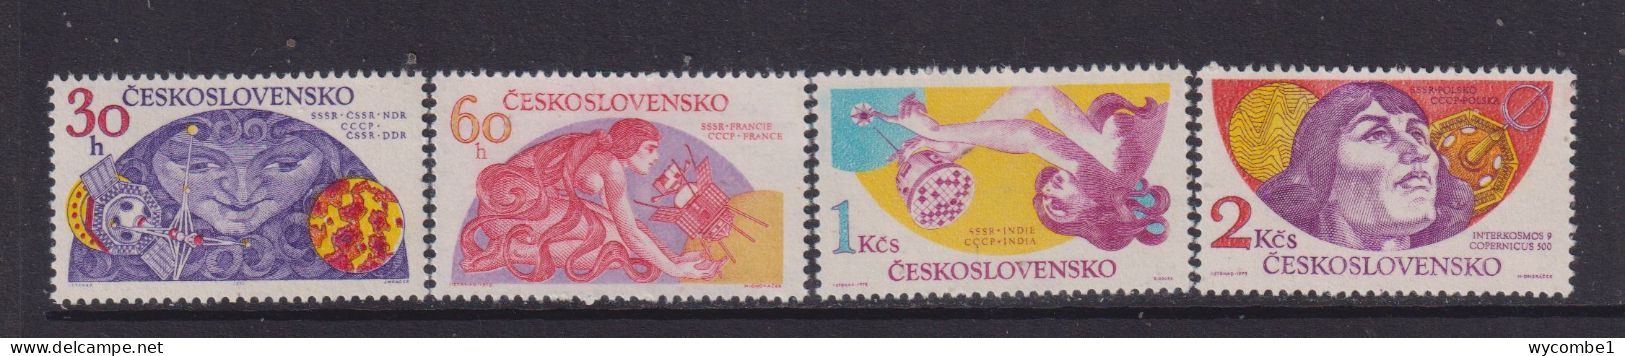 CZECHOSLOVAKIA  - 1975 Space Research Set Never Hinged Mint - Unused Stamps